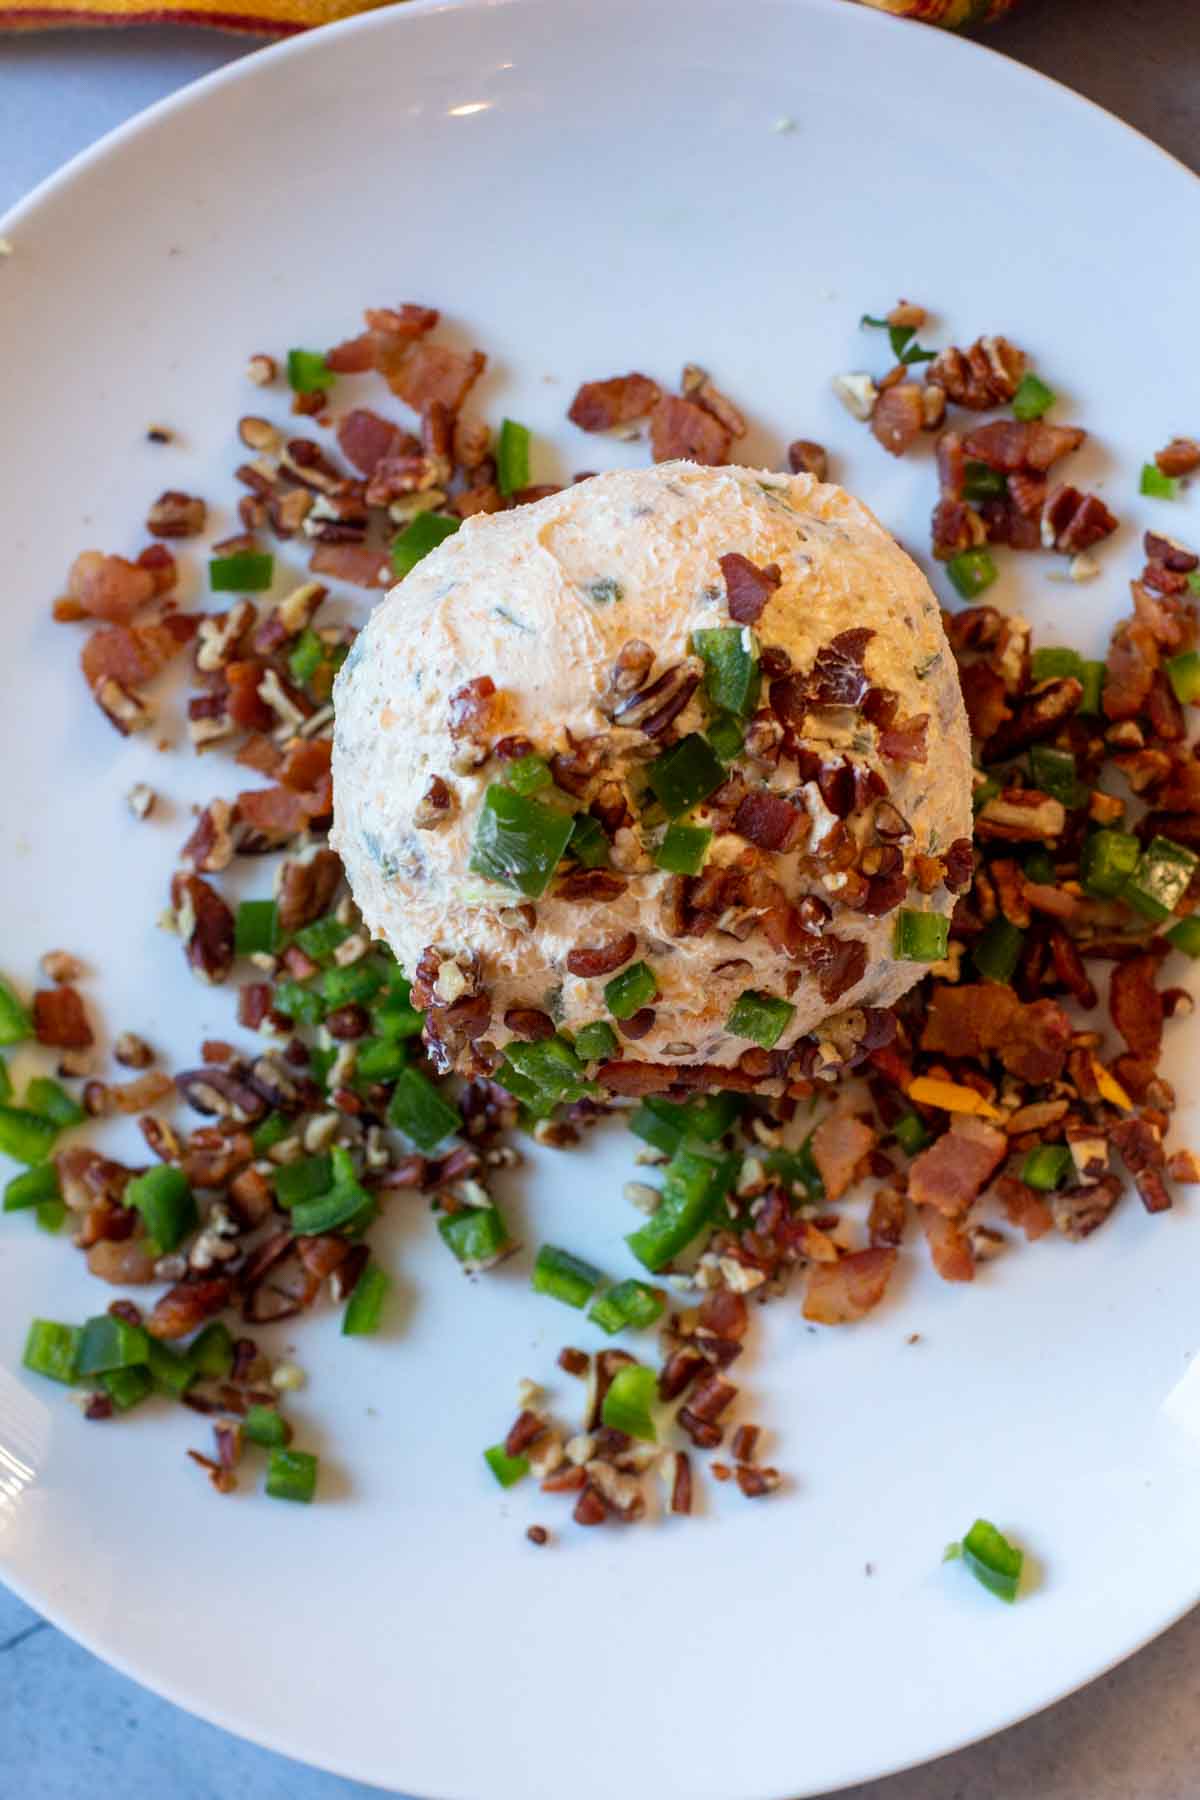 Rolling a cheeseball in jalapeno, bacon and pecans.